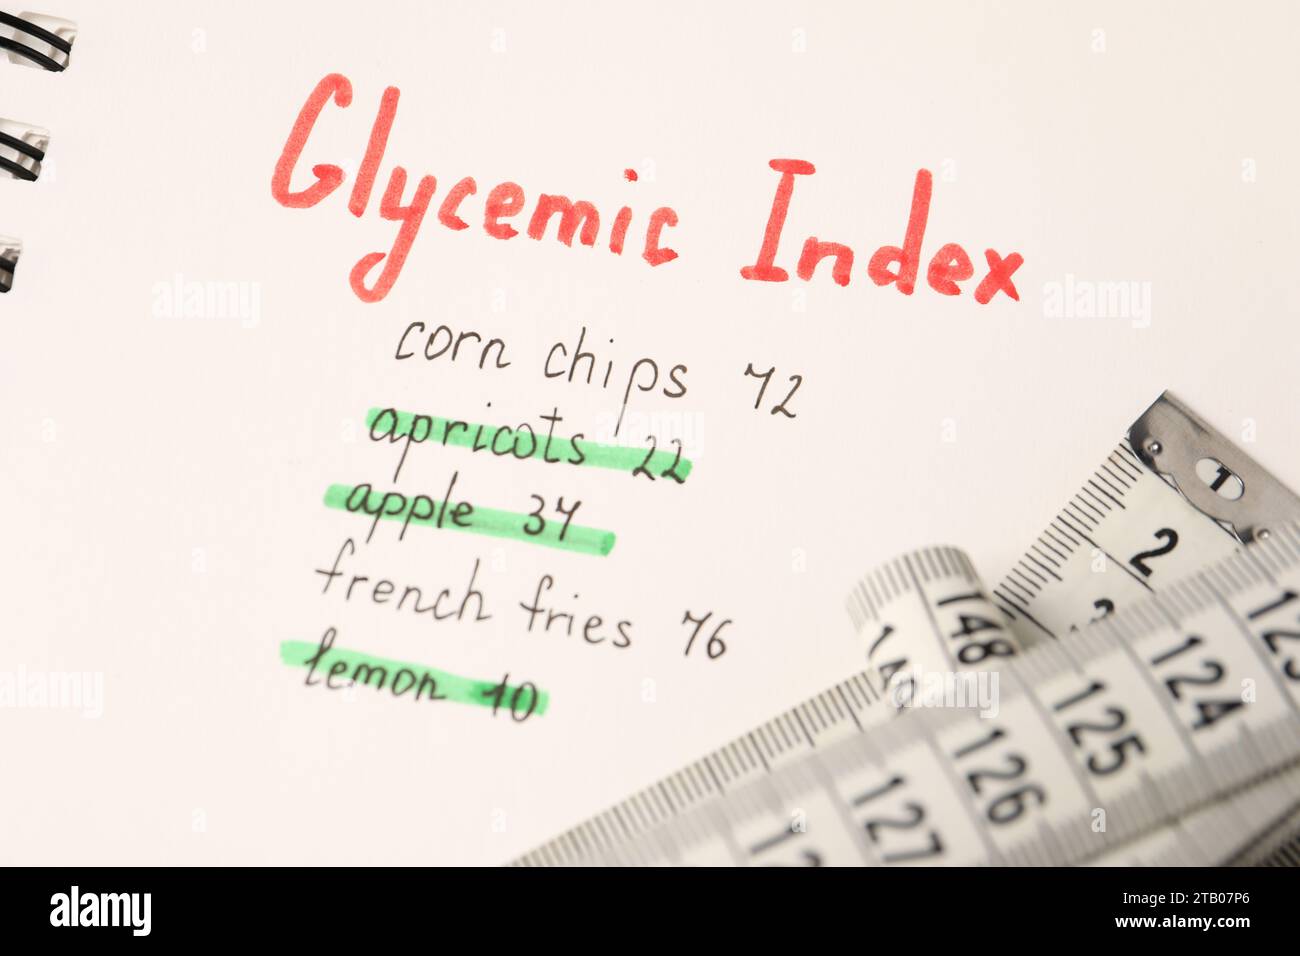 Glycemic Index. Notebook with information and measuring tape, closeup Stock Photo